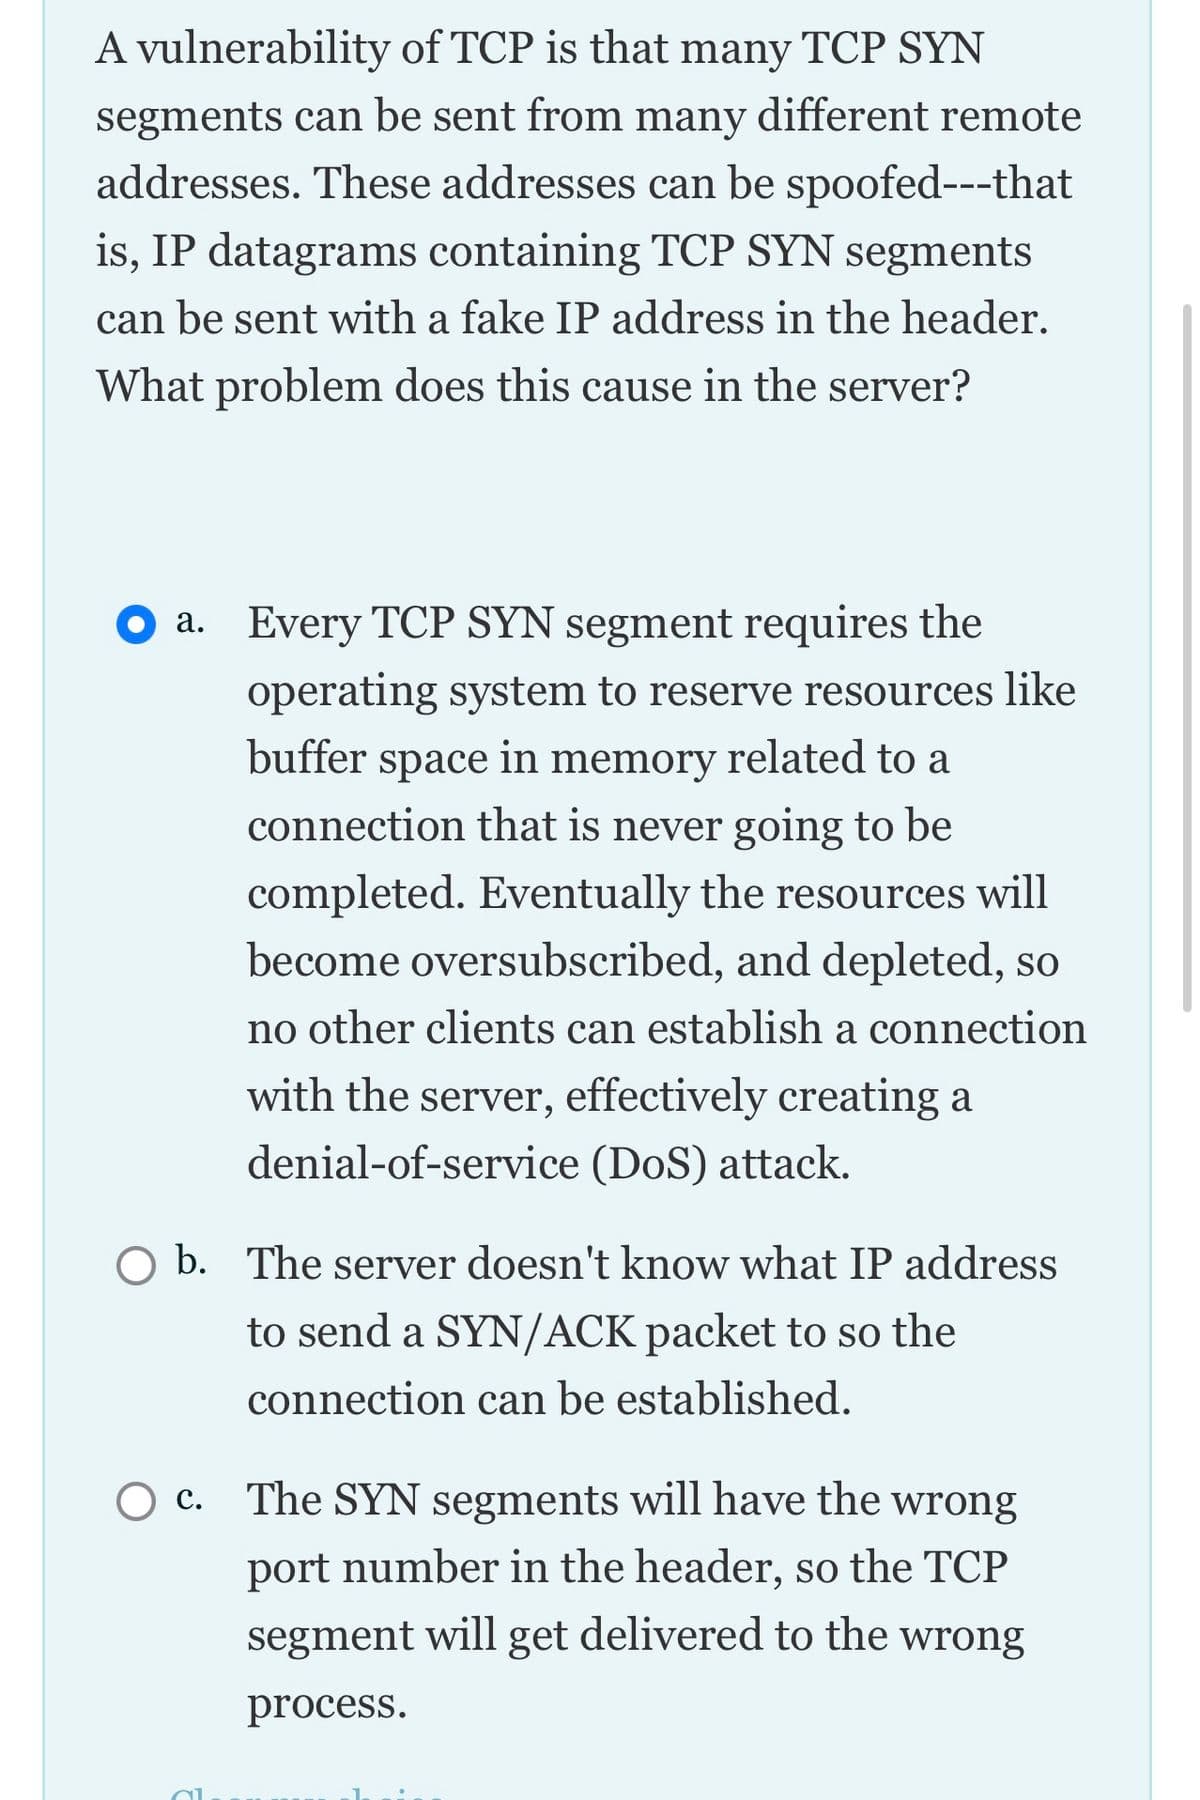 A vulnerability of TCP is that many TCP SYN
segments can be sent from many different remote
addresses. These addresses can be spoofed---that
is, IP datagrams containing TCP SYN segments
can be sent with a fake IP address in the header.
What problem does this cause in the server?
a. Every TCP SYN segment requires the
operating system to reserve resources like
buffer
space
in memory
related to a
connection that is never going to be
completed. Eventually the resources will
become oversubscribed, and depleted, so
no other clients can establish a connection
with the server, effectively creating a
denial-of-service (DoS) attack.
O b. The server doesn't know what IP address
to send a SYN/ACK packet to so the
connection can be established.
c. The SYN segments will have the wrong
port number in the header, so the TCP
segment will get delivered to the wrong
process.
